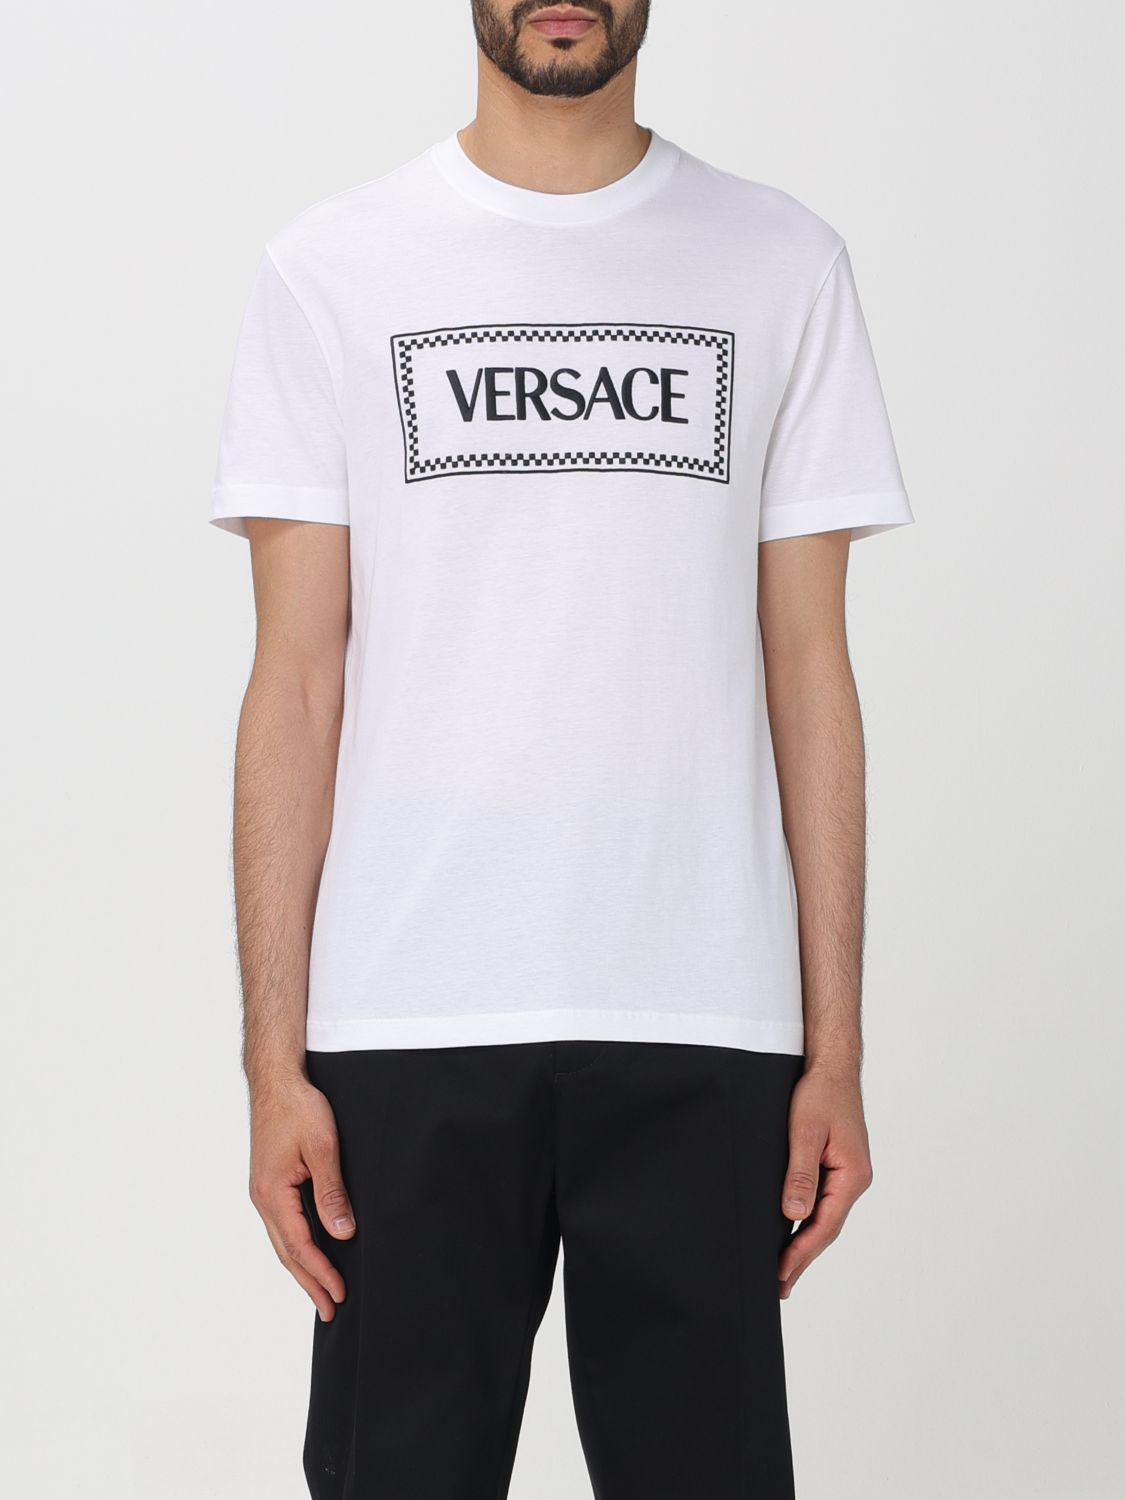 Versace White Embroidered T-shirt